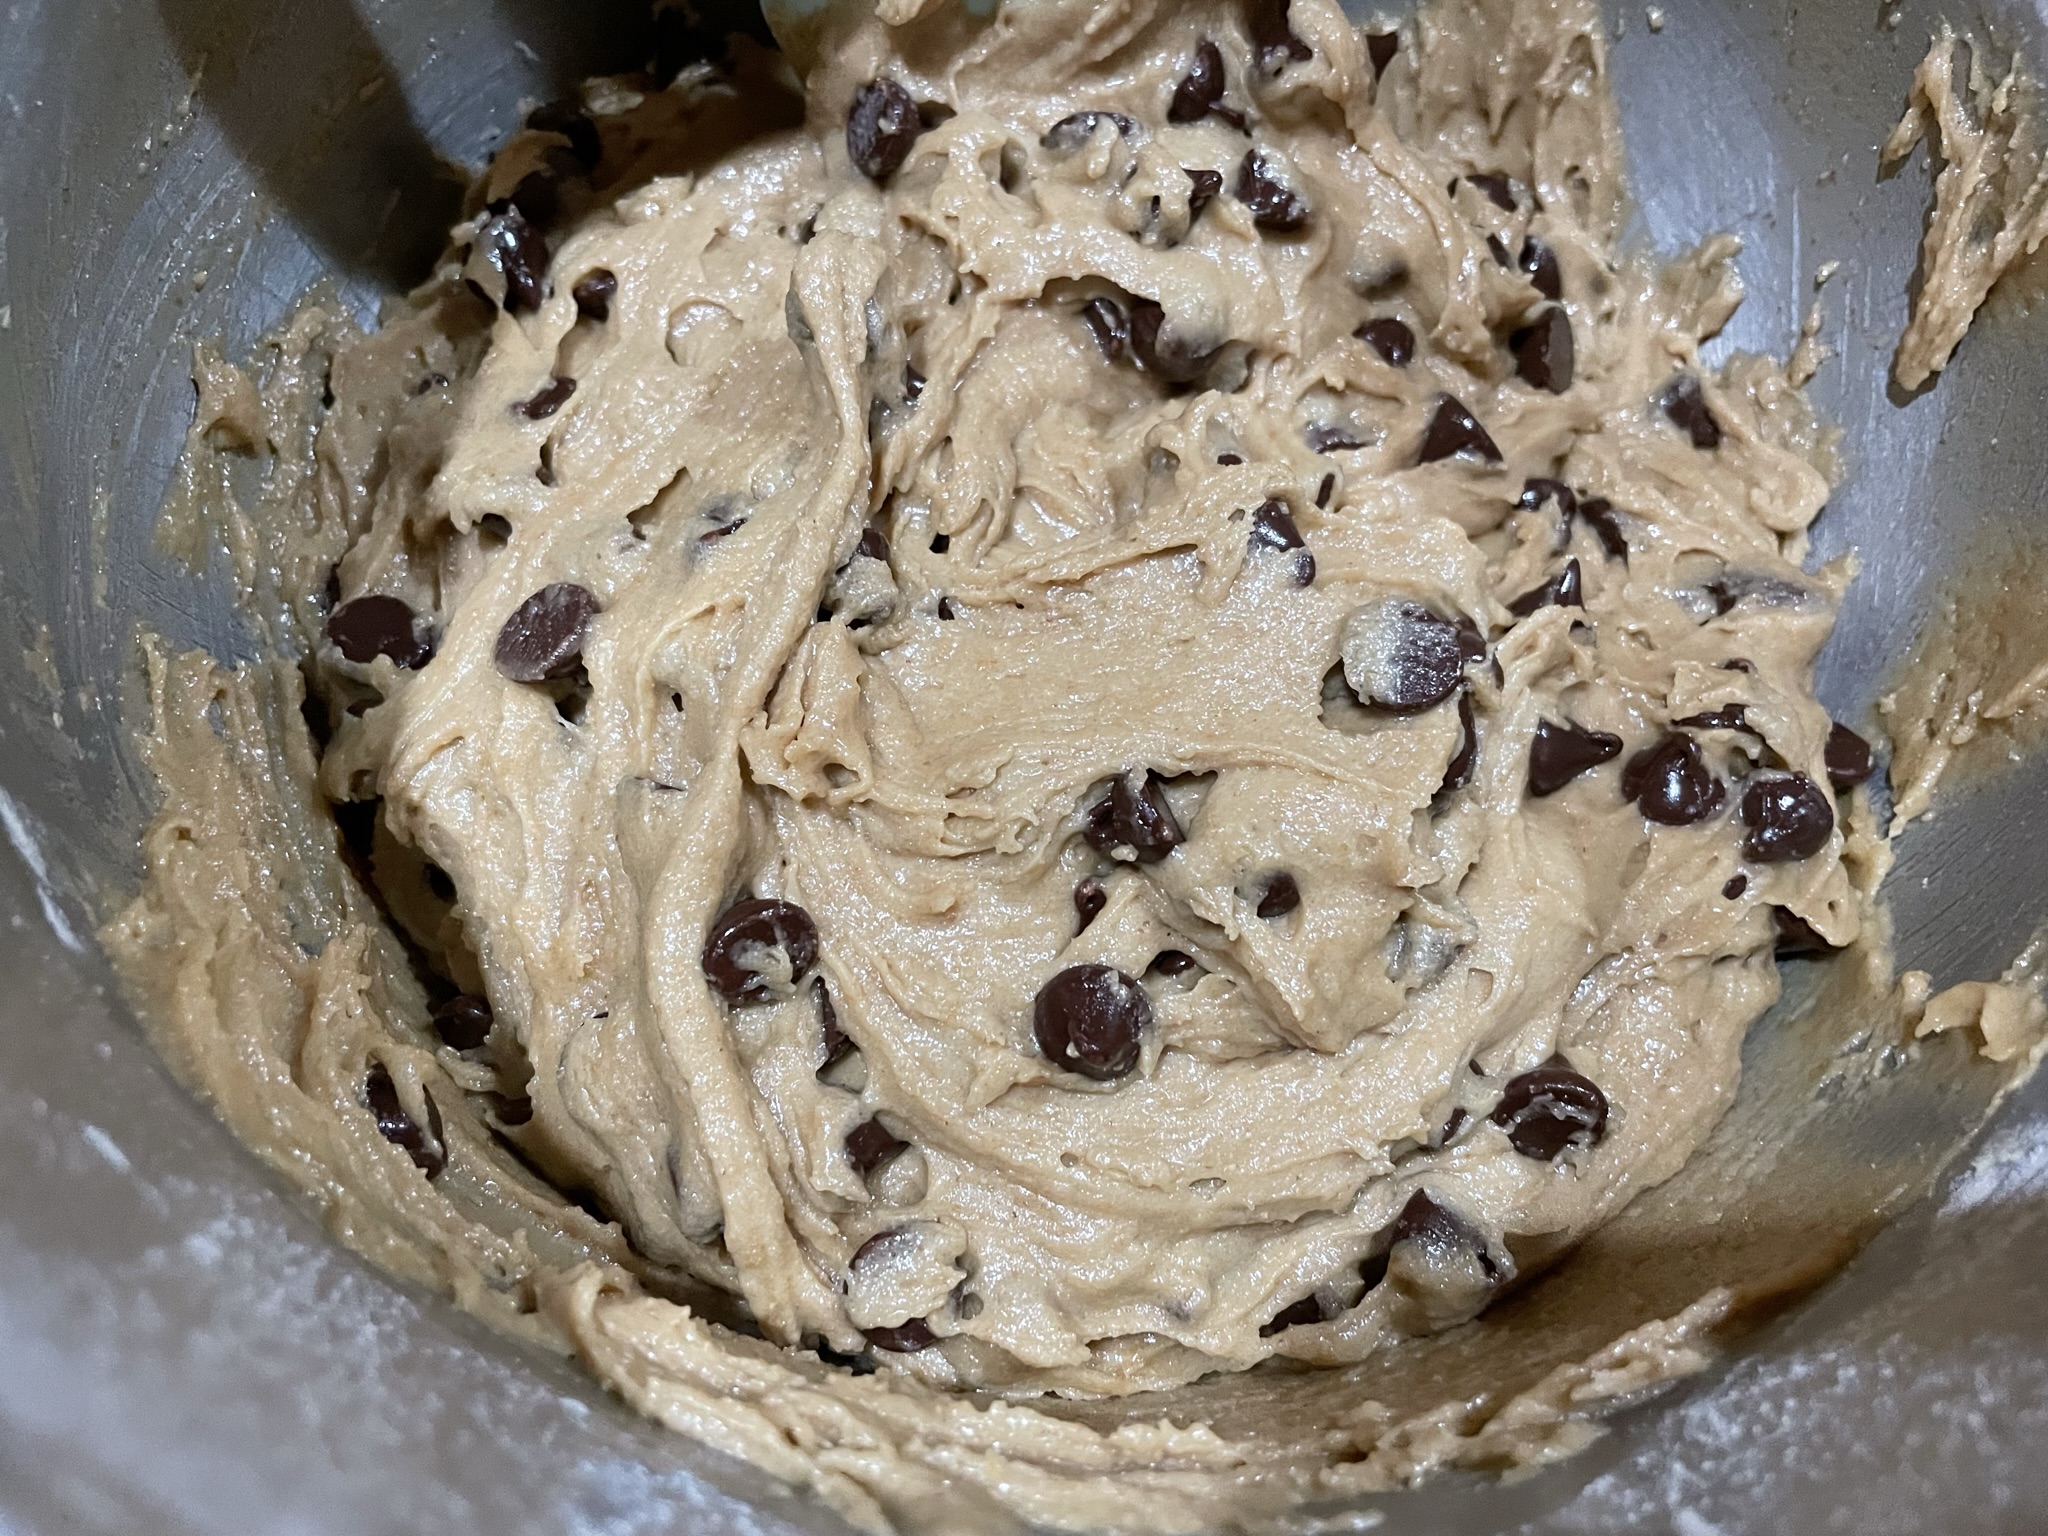 Combine chocolate chips into cookie batter.